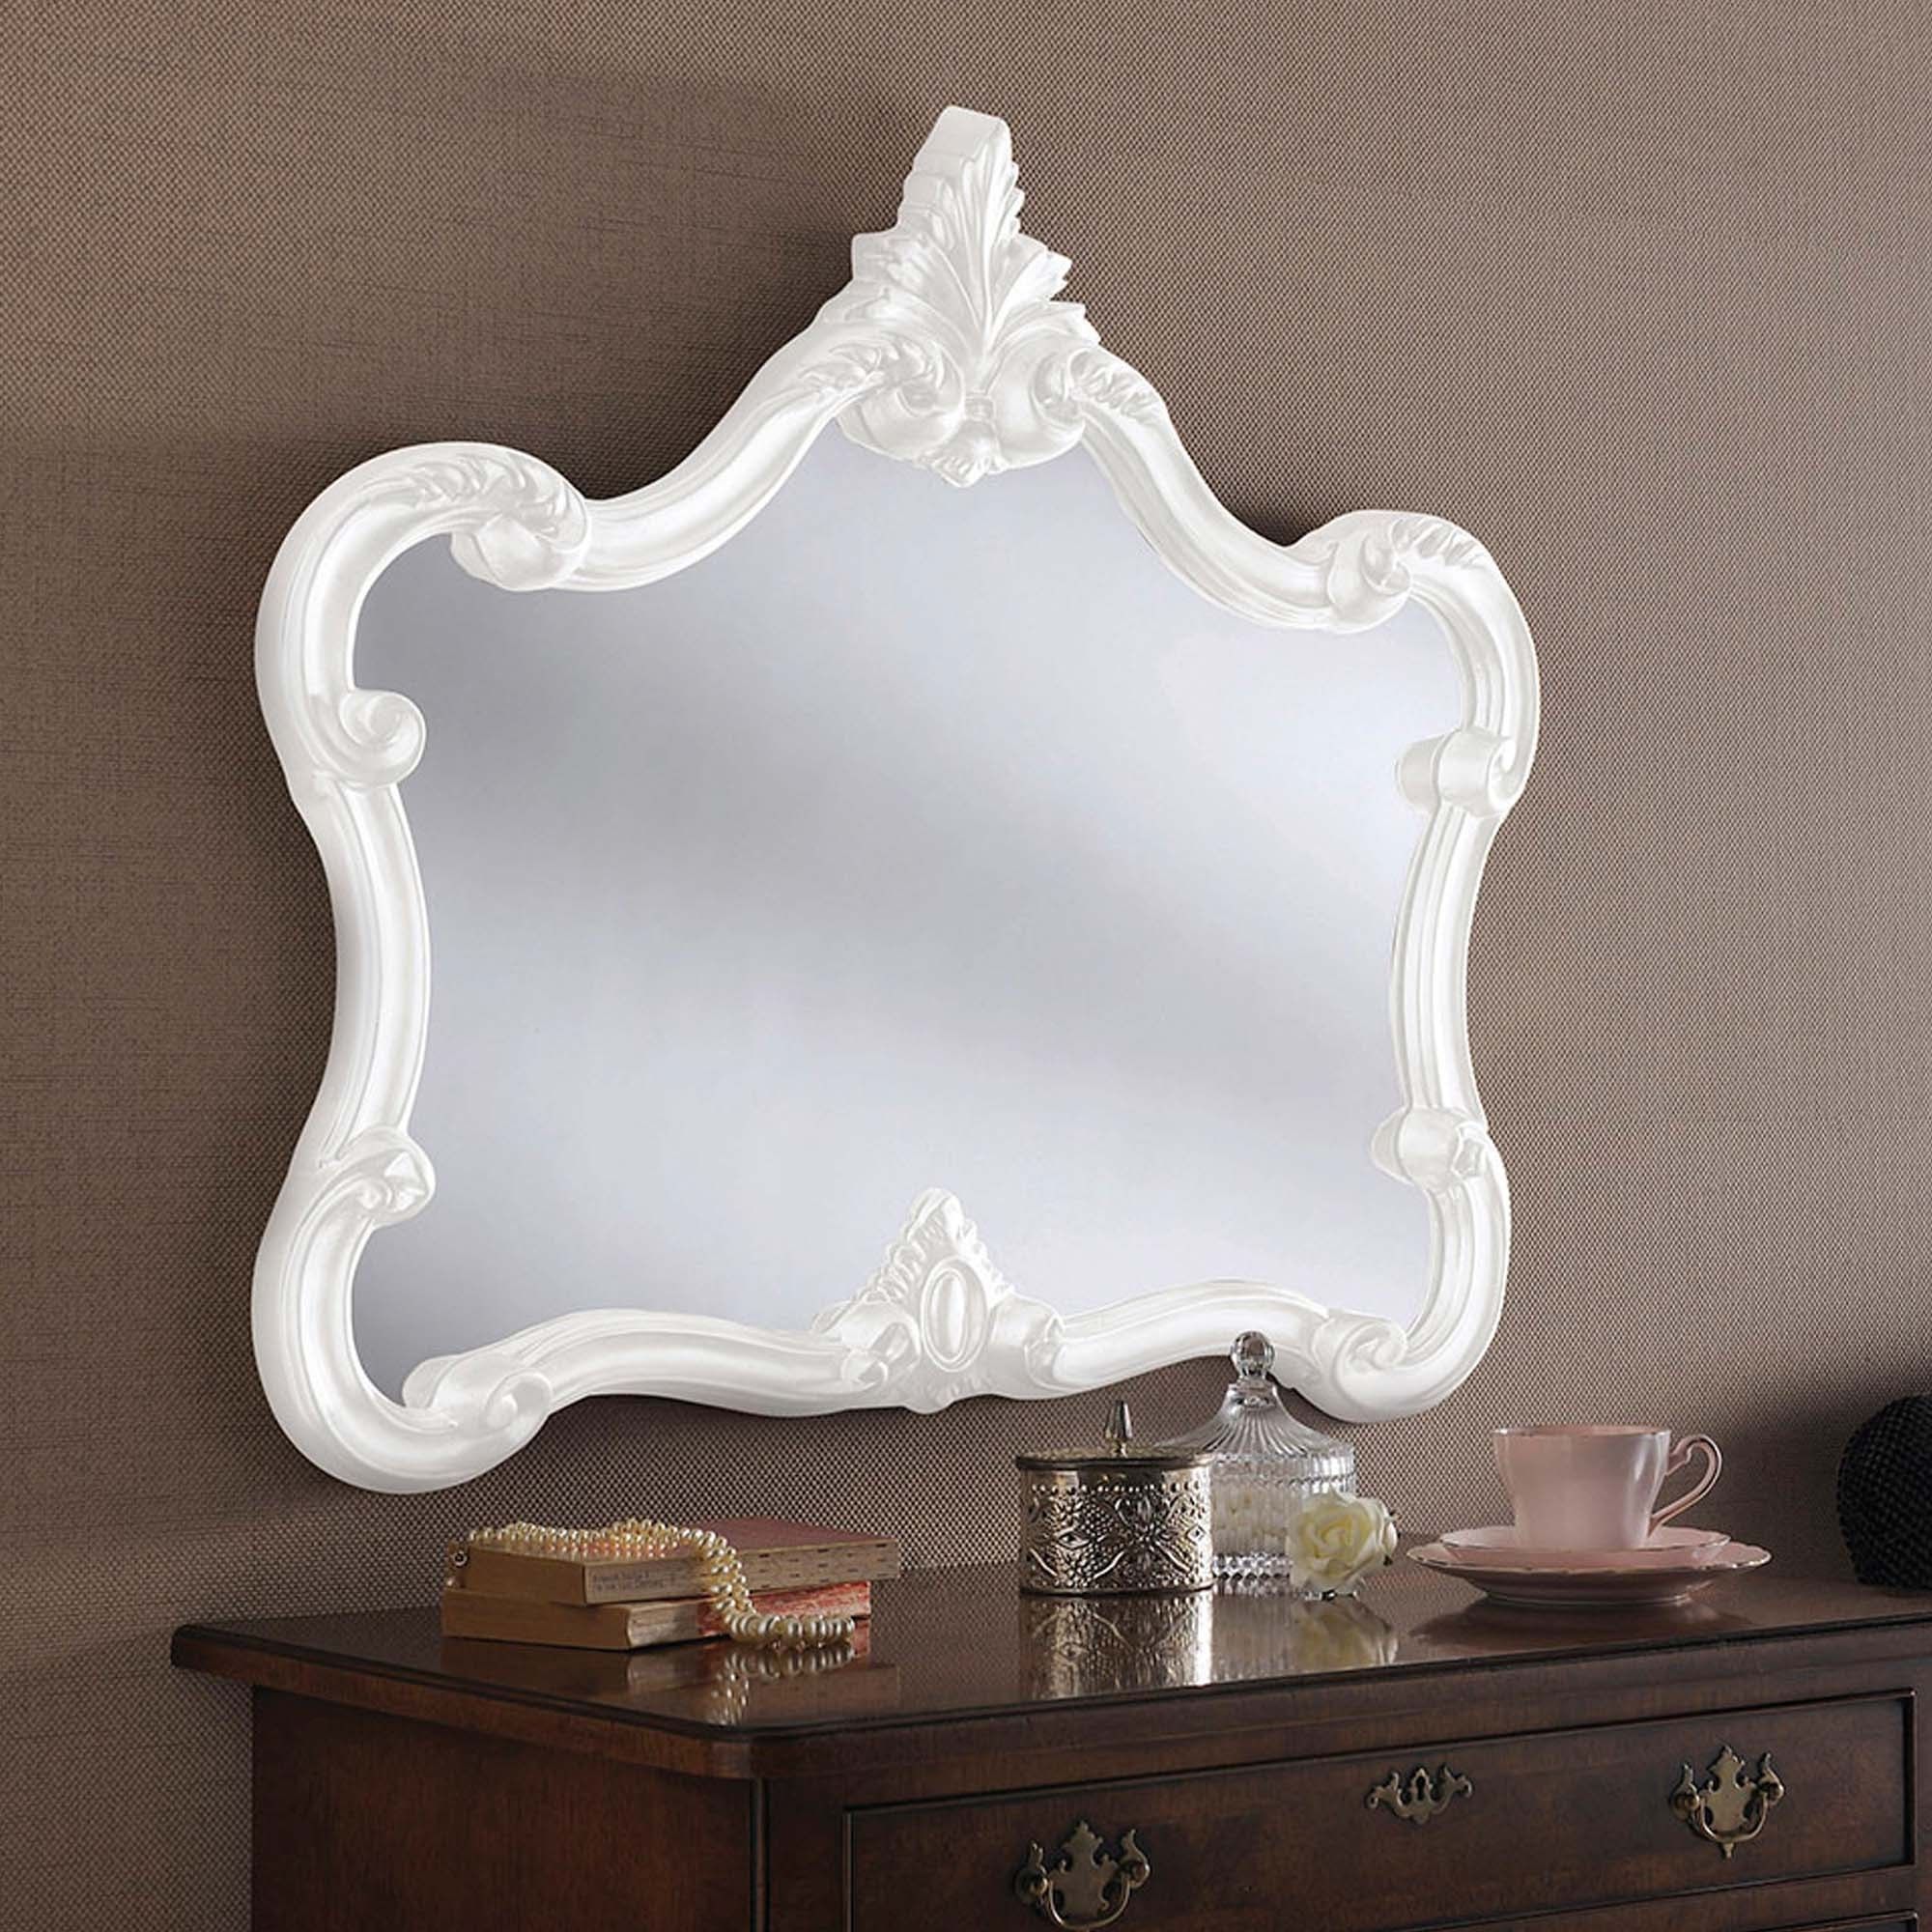 Antique French Style White Ornate Wall Mirror | Wall Mirrors With White Wall Mirrors (View 4 of 15)